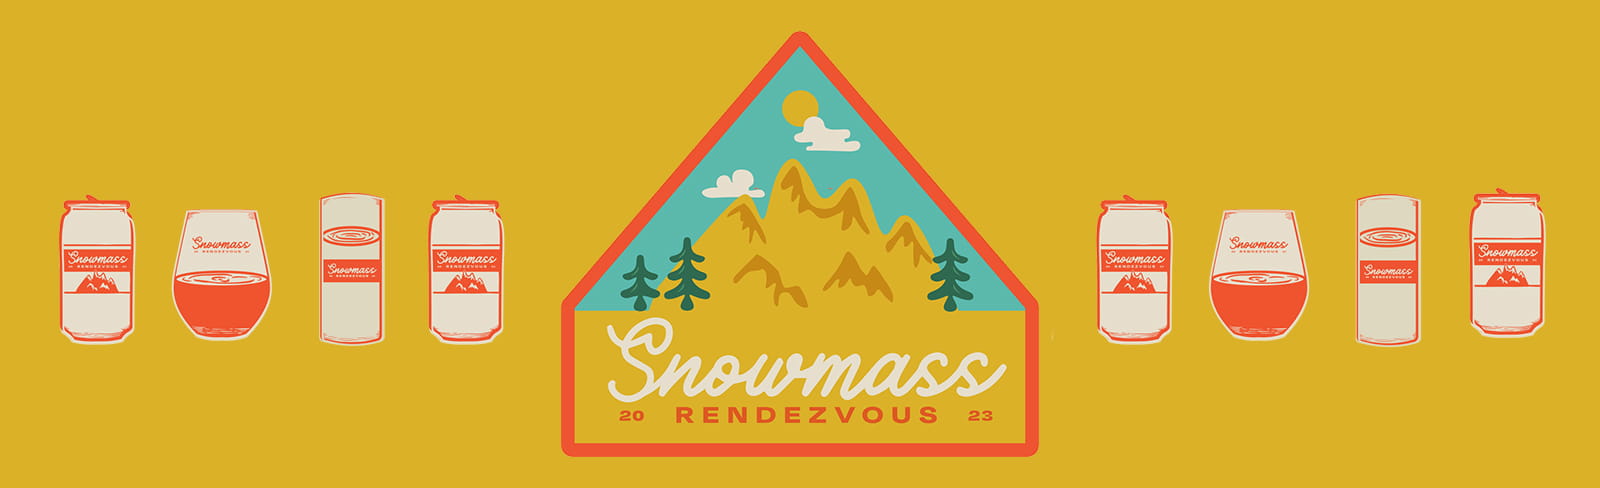 a logo with mountains and trees